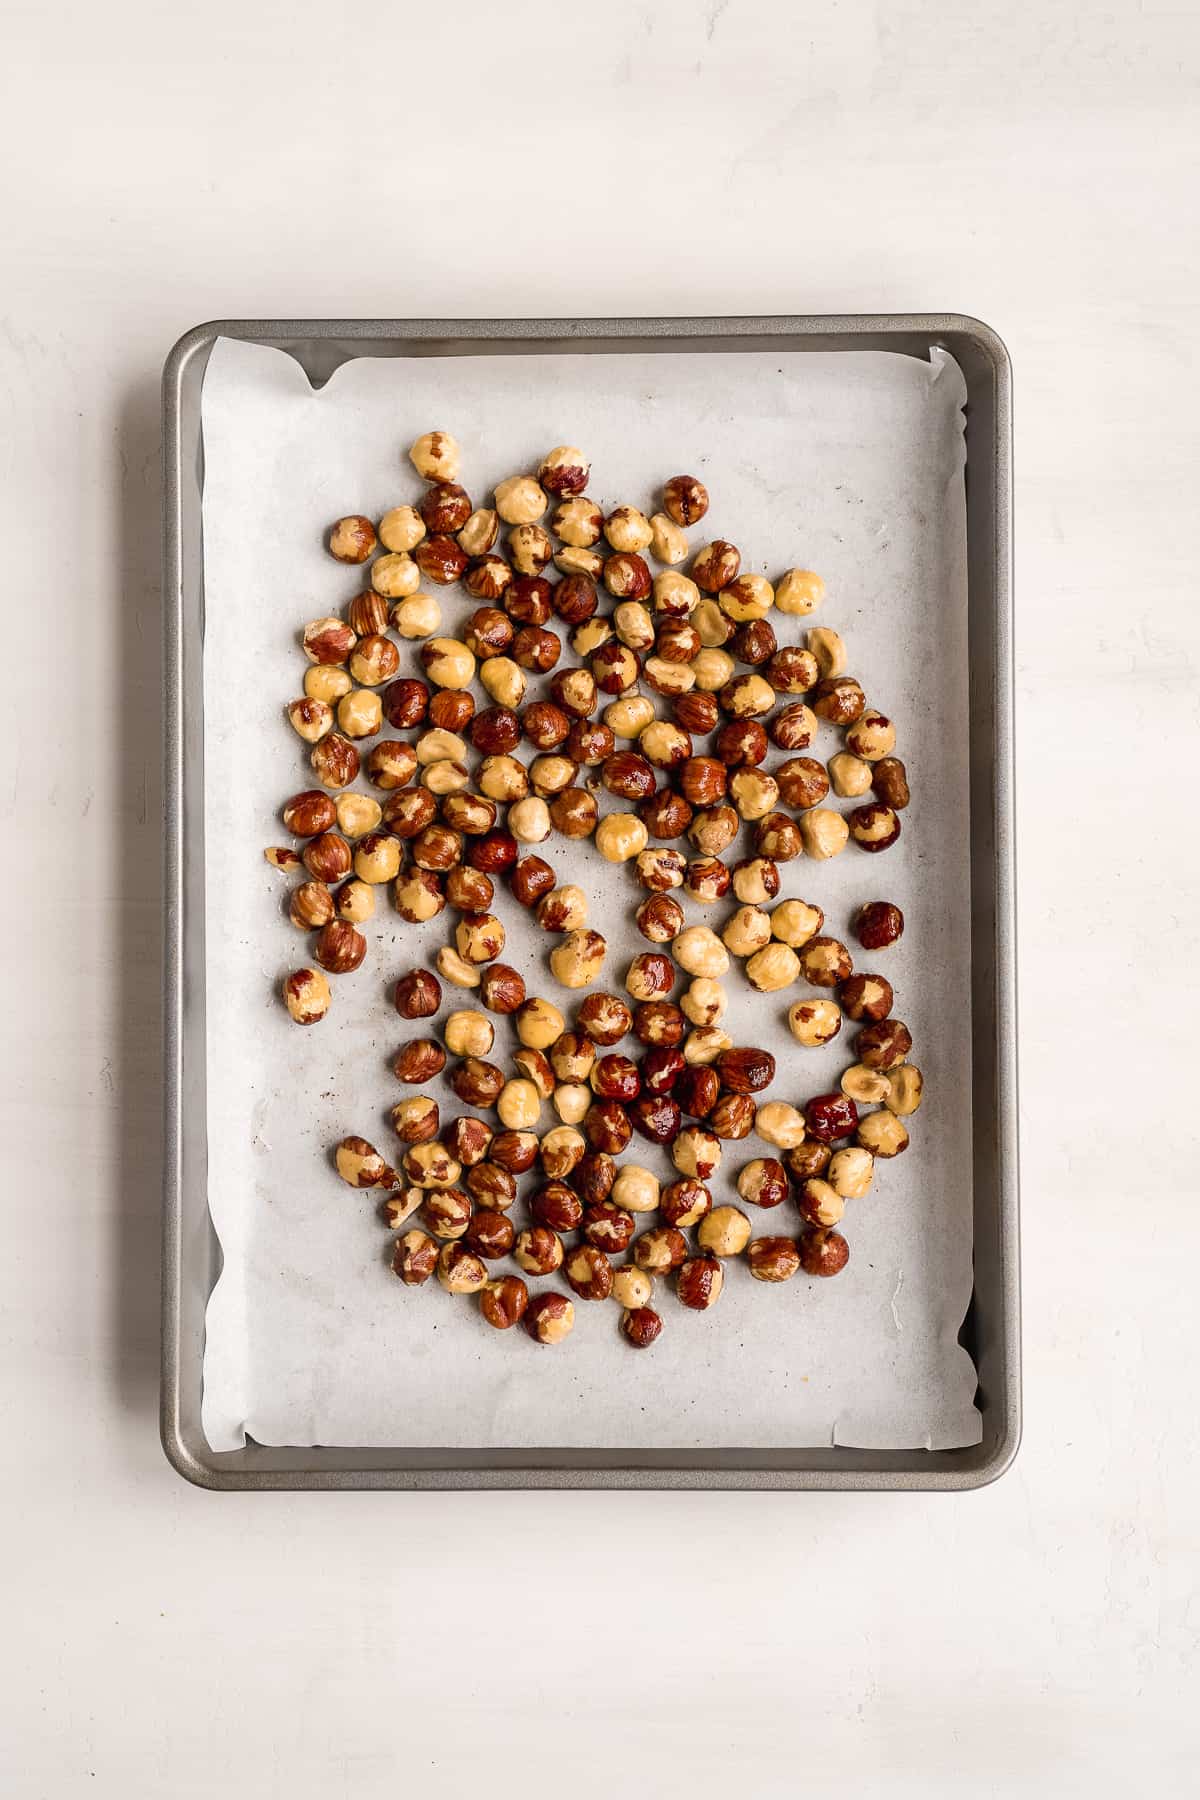 Hazelnuts scattered on a baking pan.